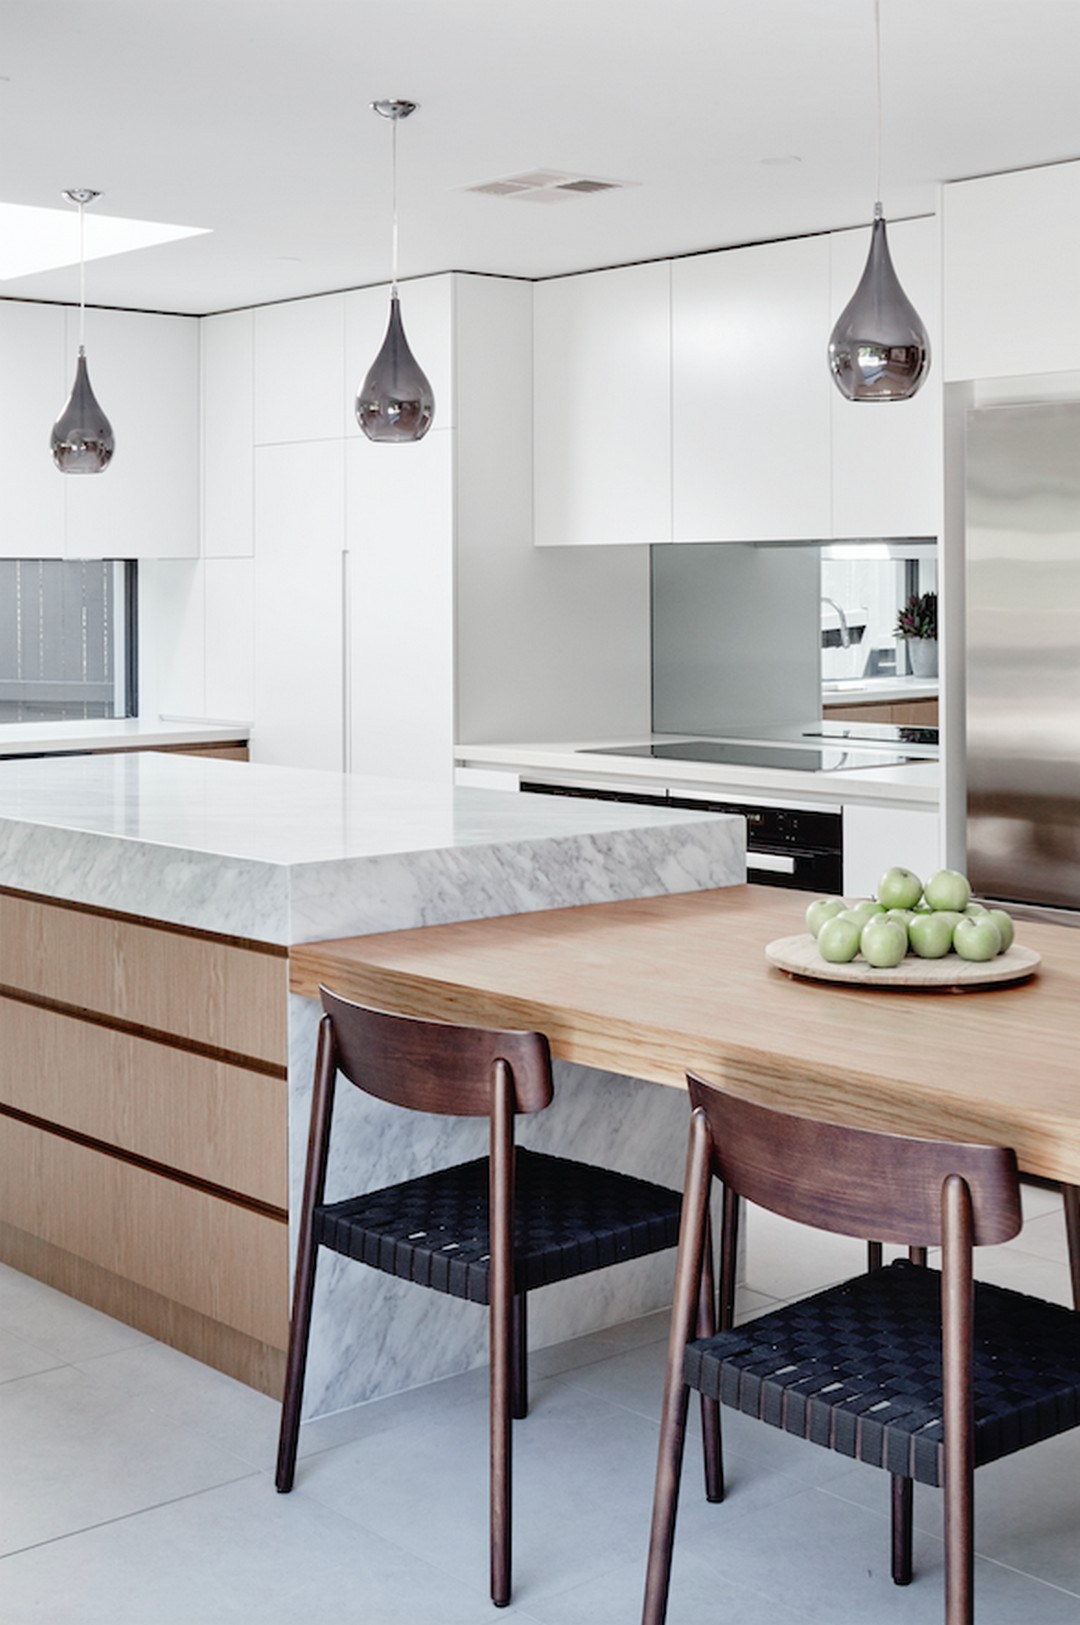 Kitchen Island Designs You'll Want For Yourself